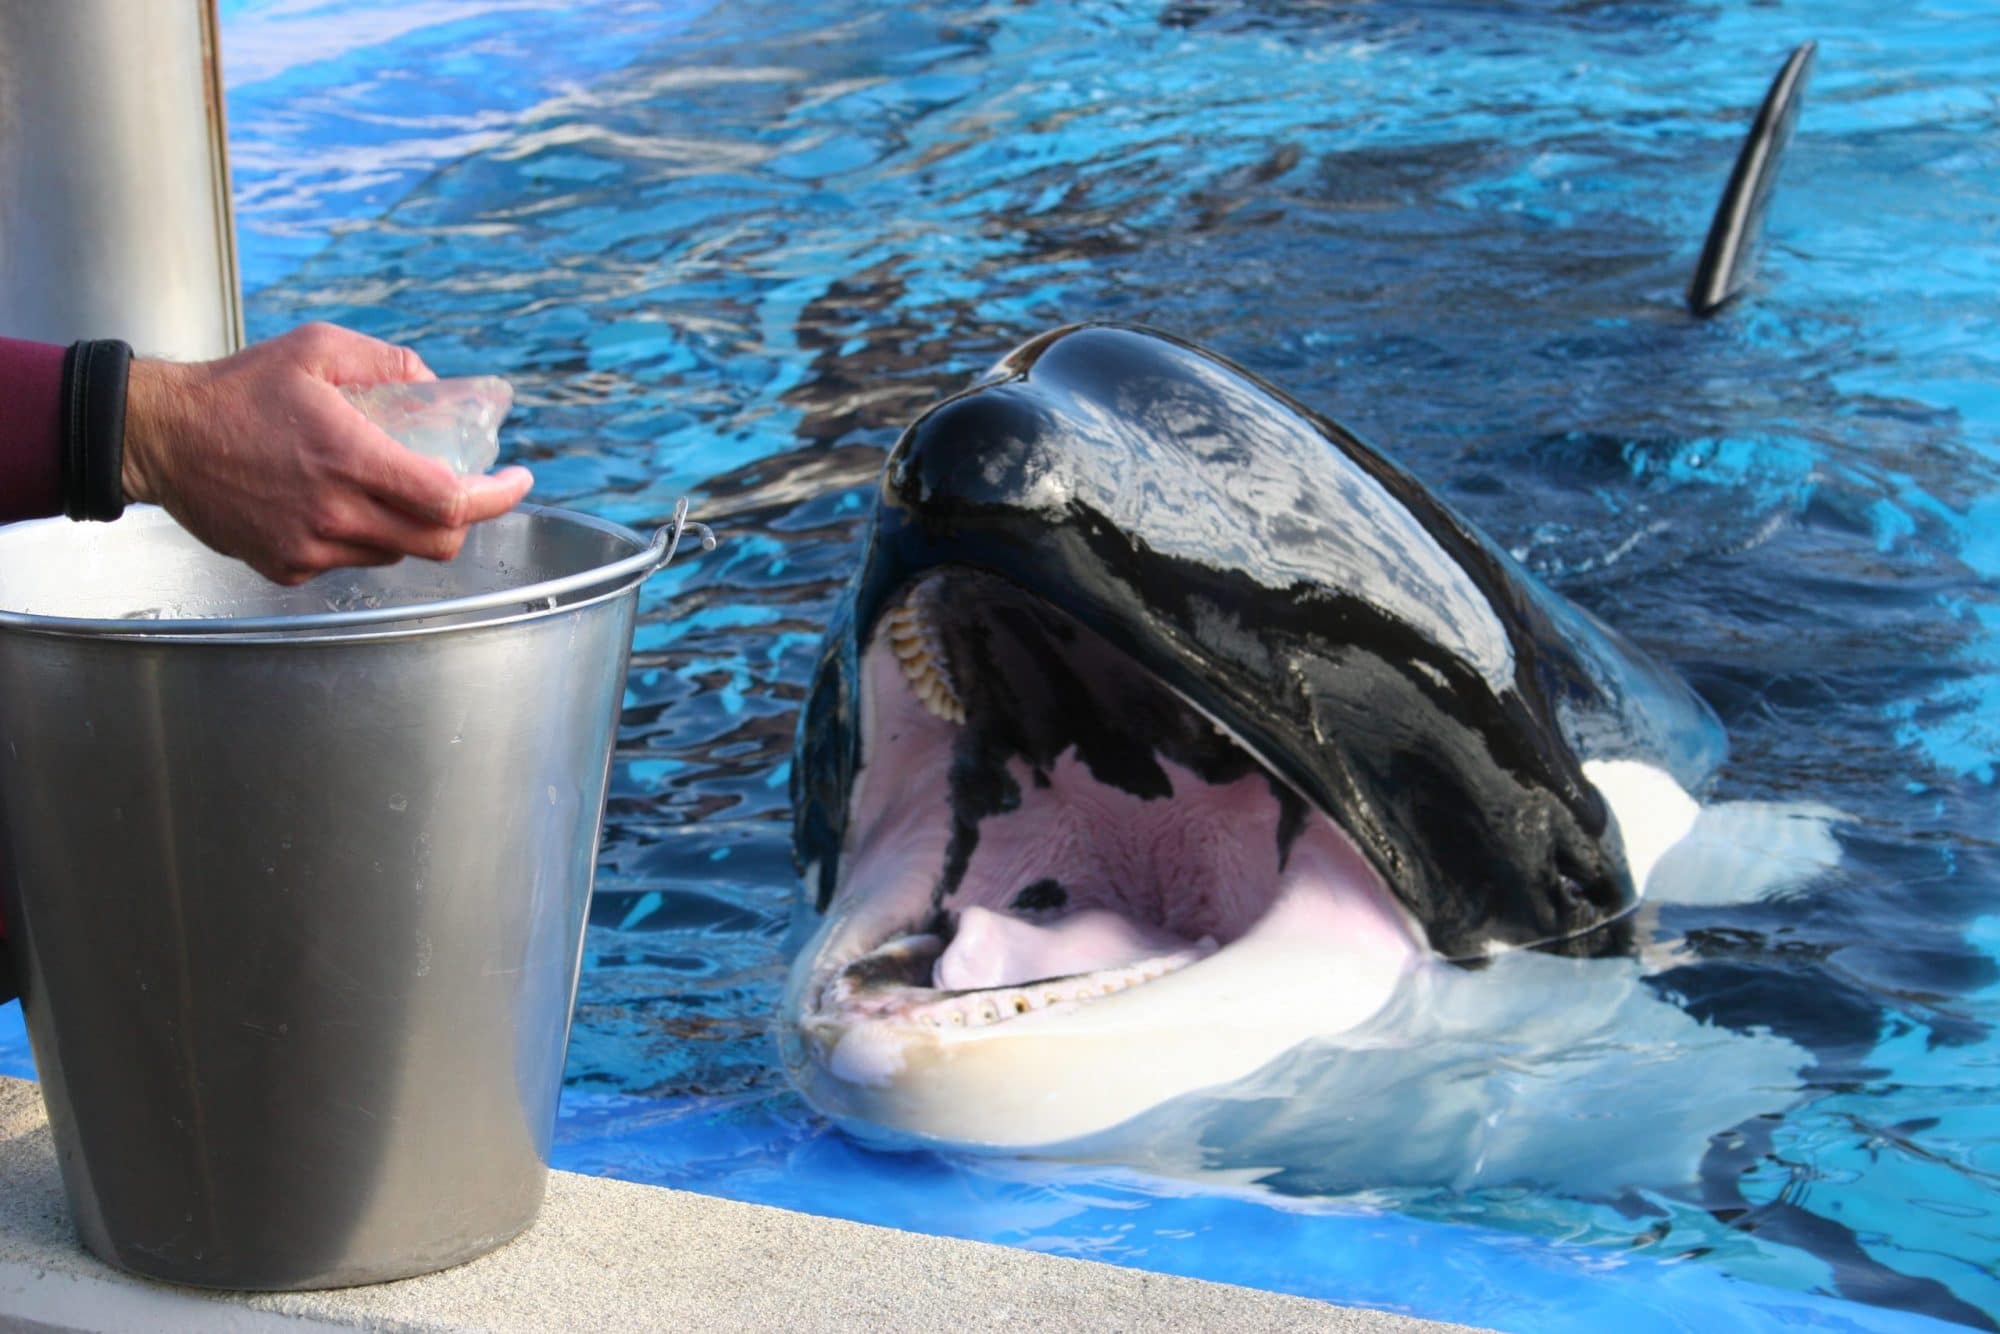 Mirage in Vegas closes wildlife attraction after third dolphin death - The  Washington Post